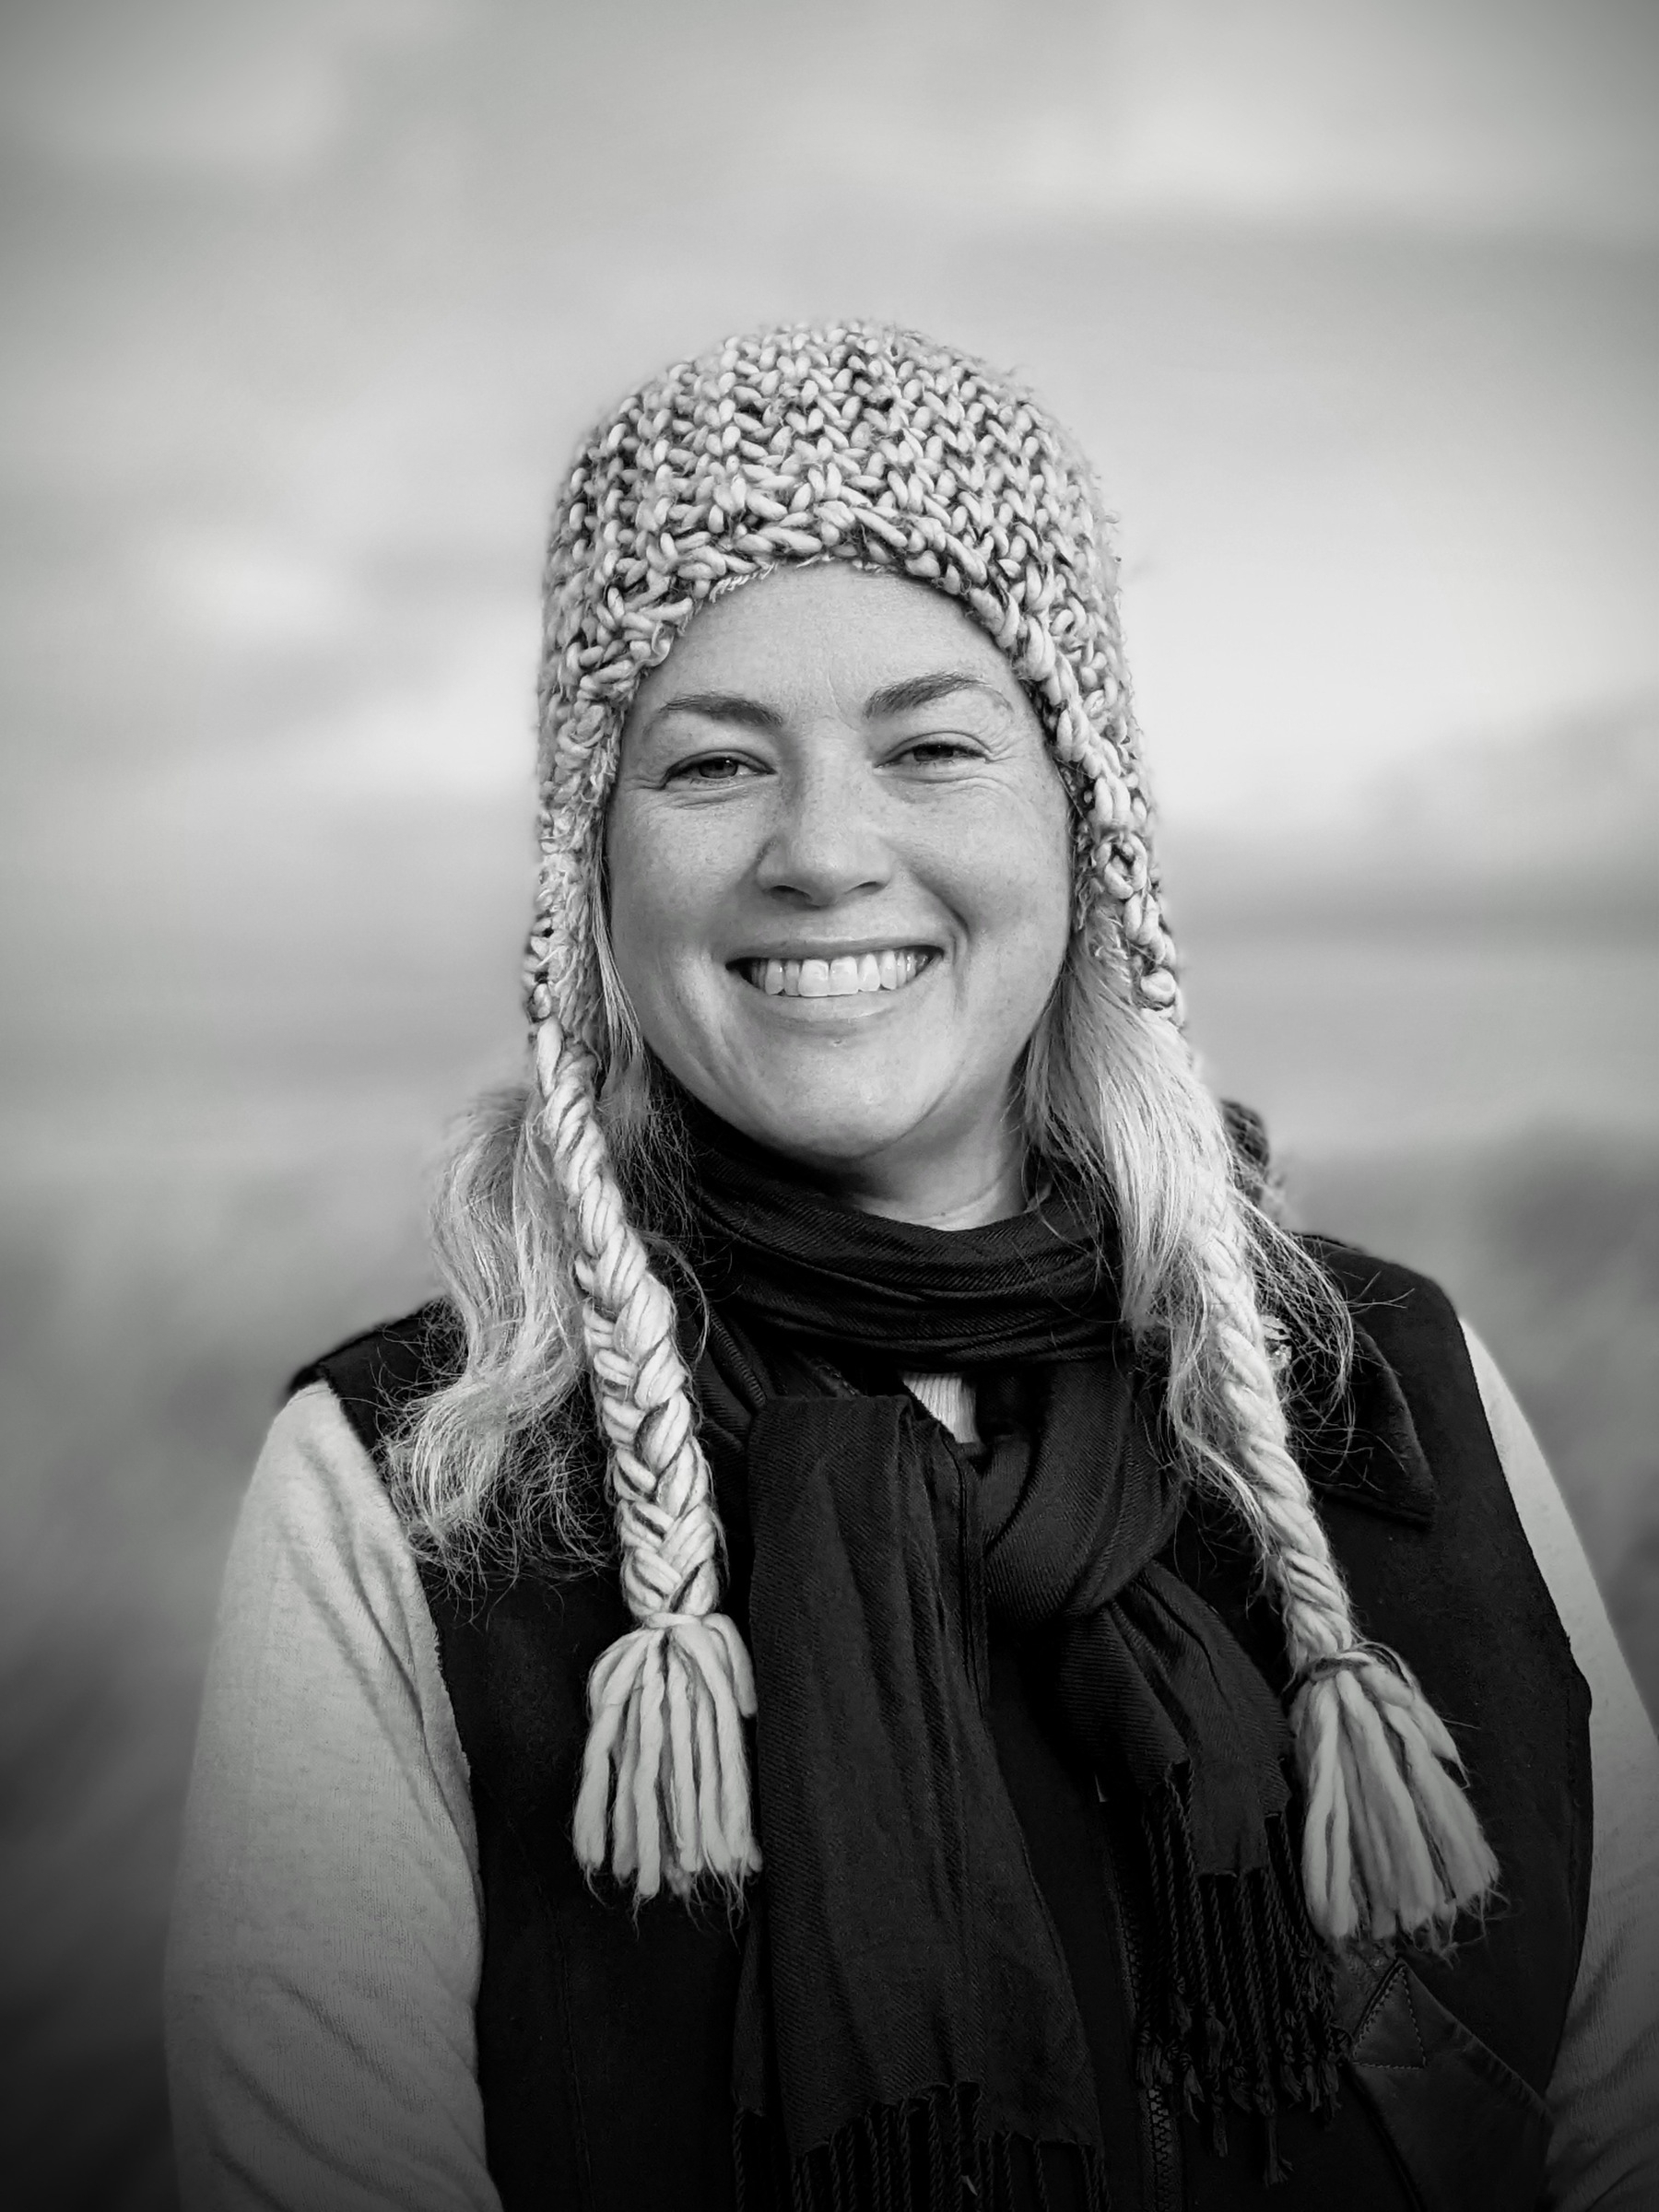 b/w portrait of me at the beach with a woolly hat on smiling at the camera